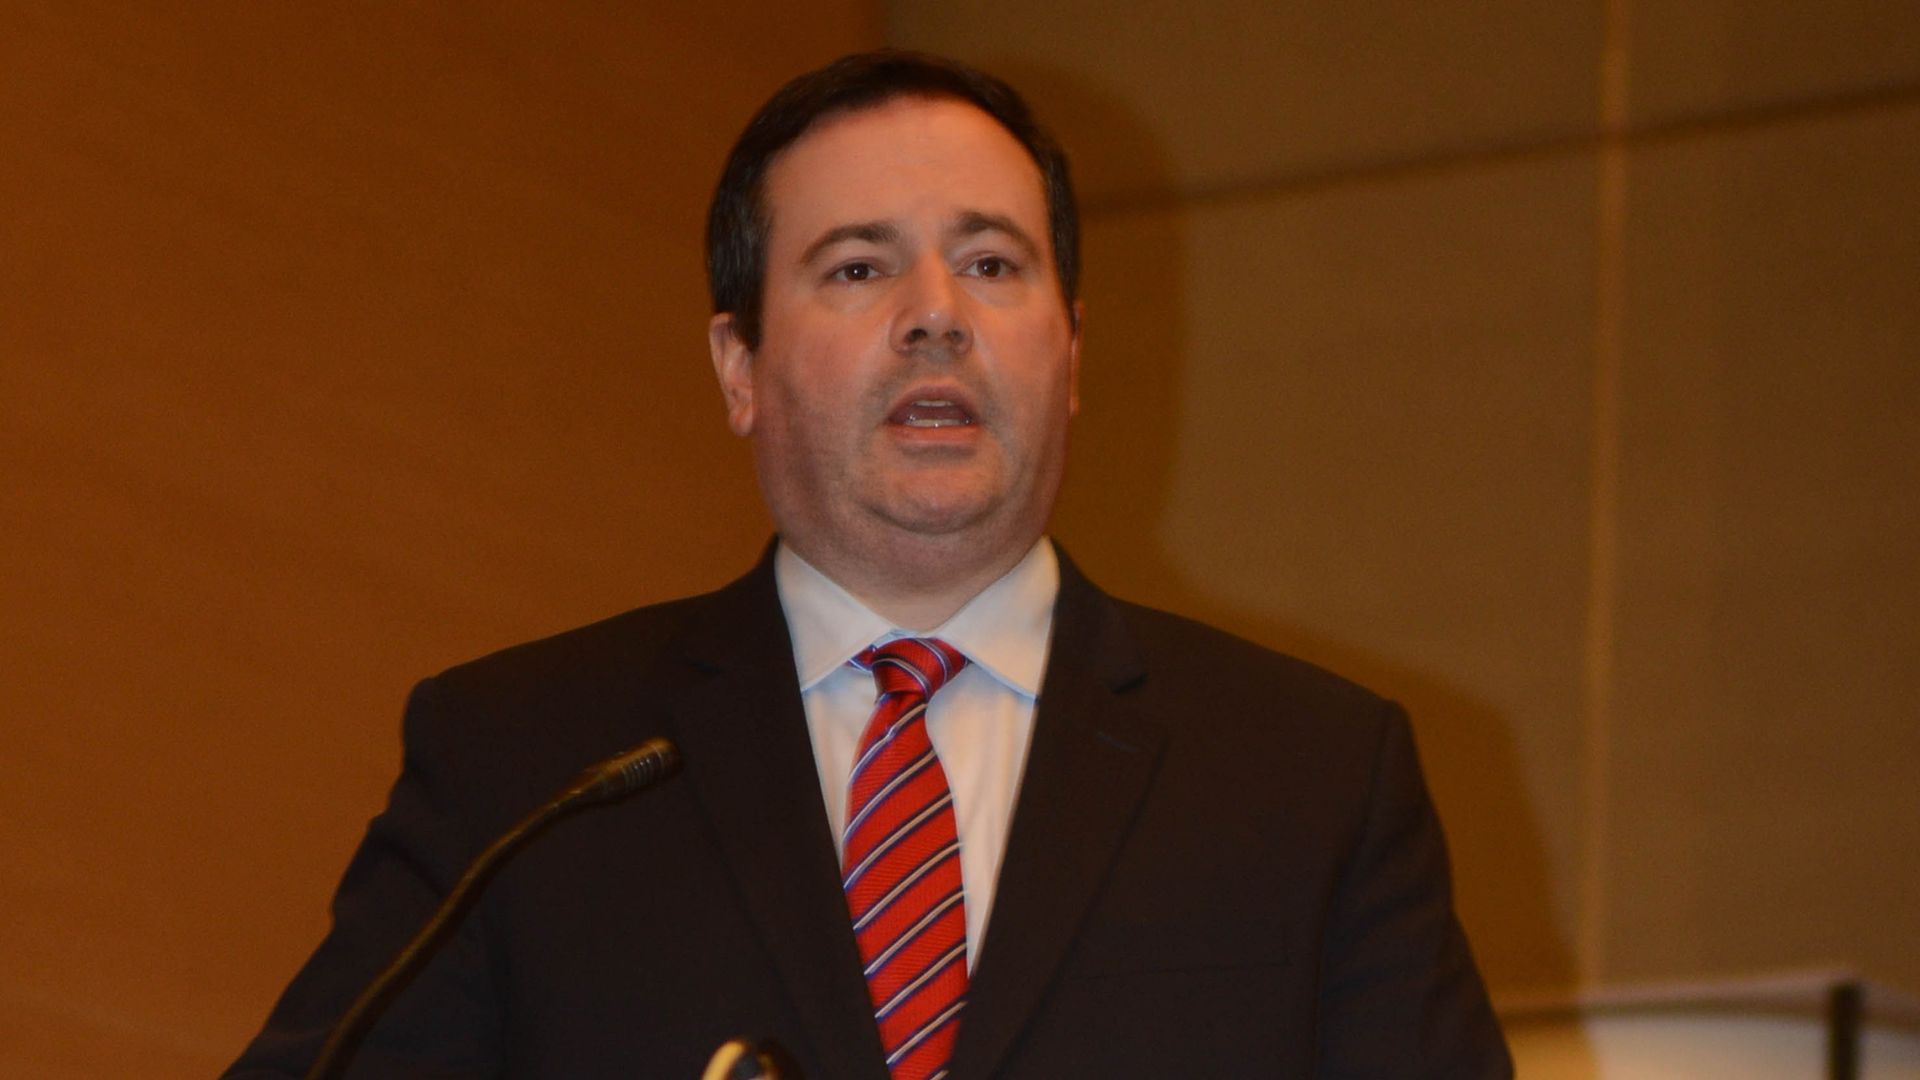 UCP leader Jason Kenney is a former federal minister.